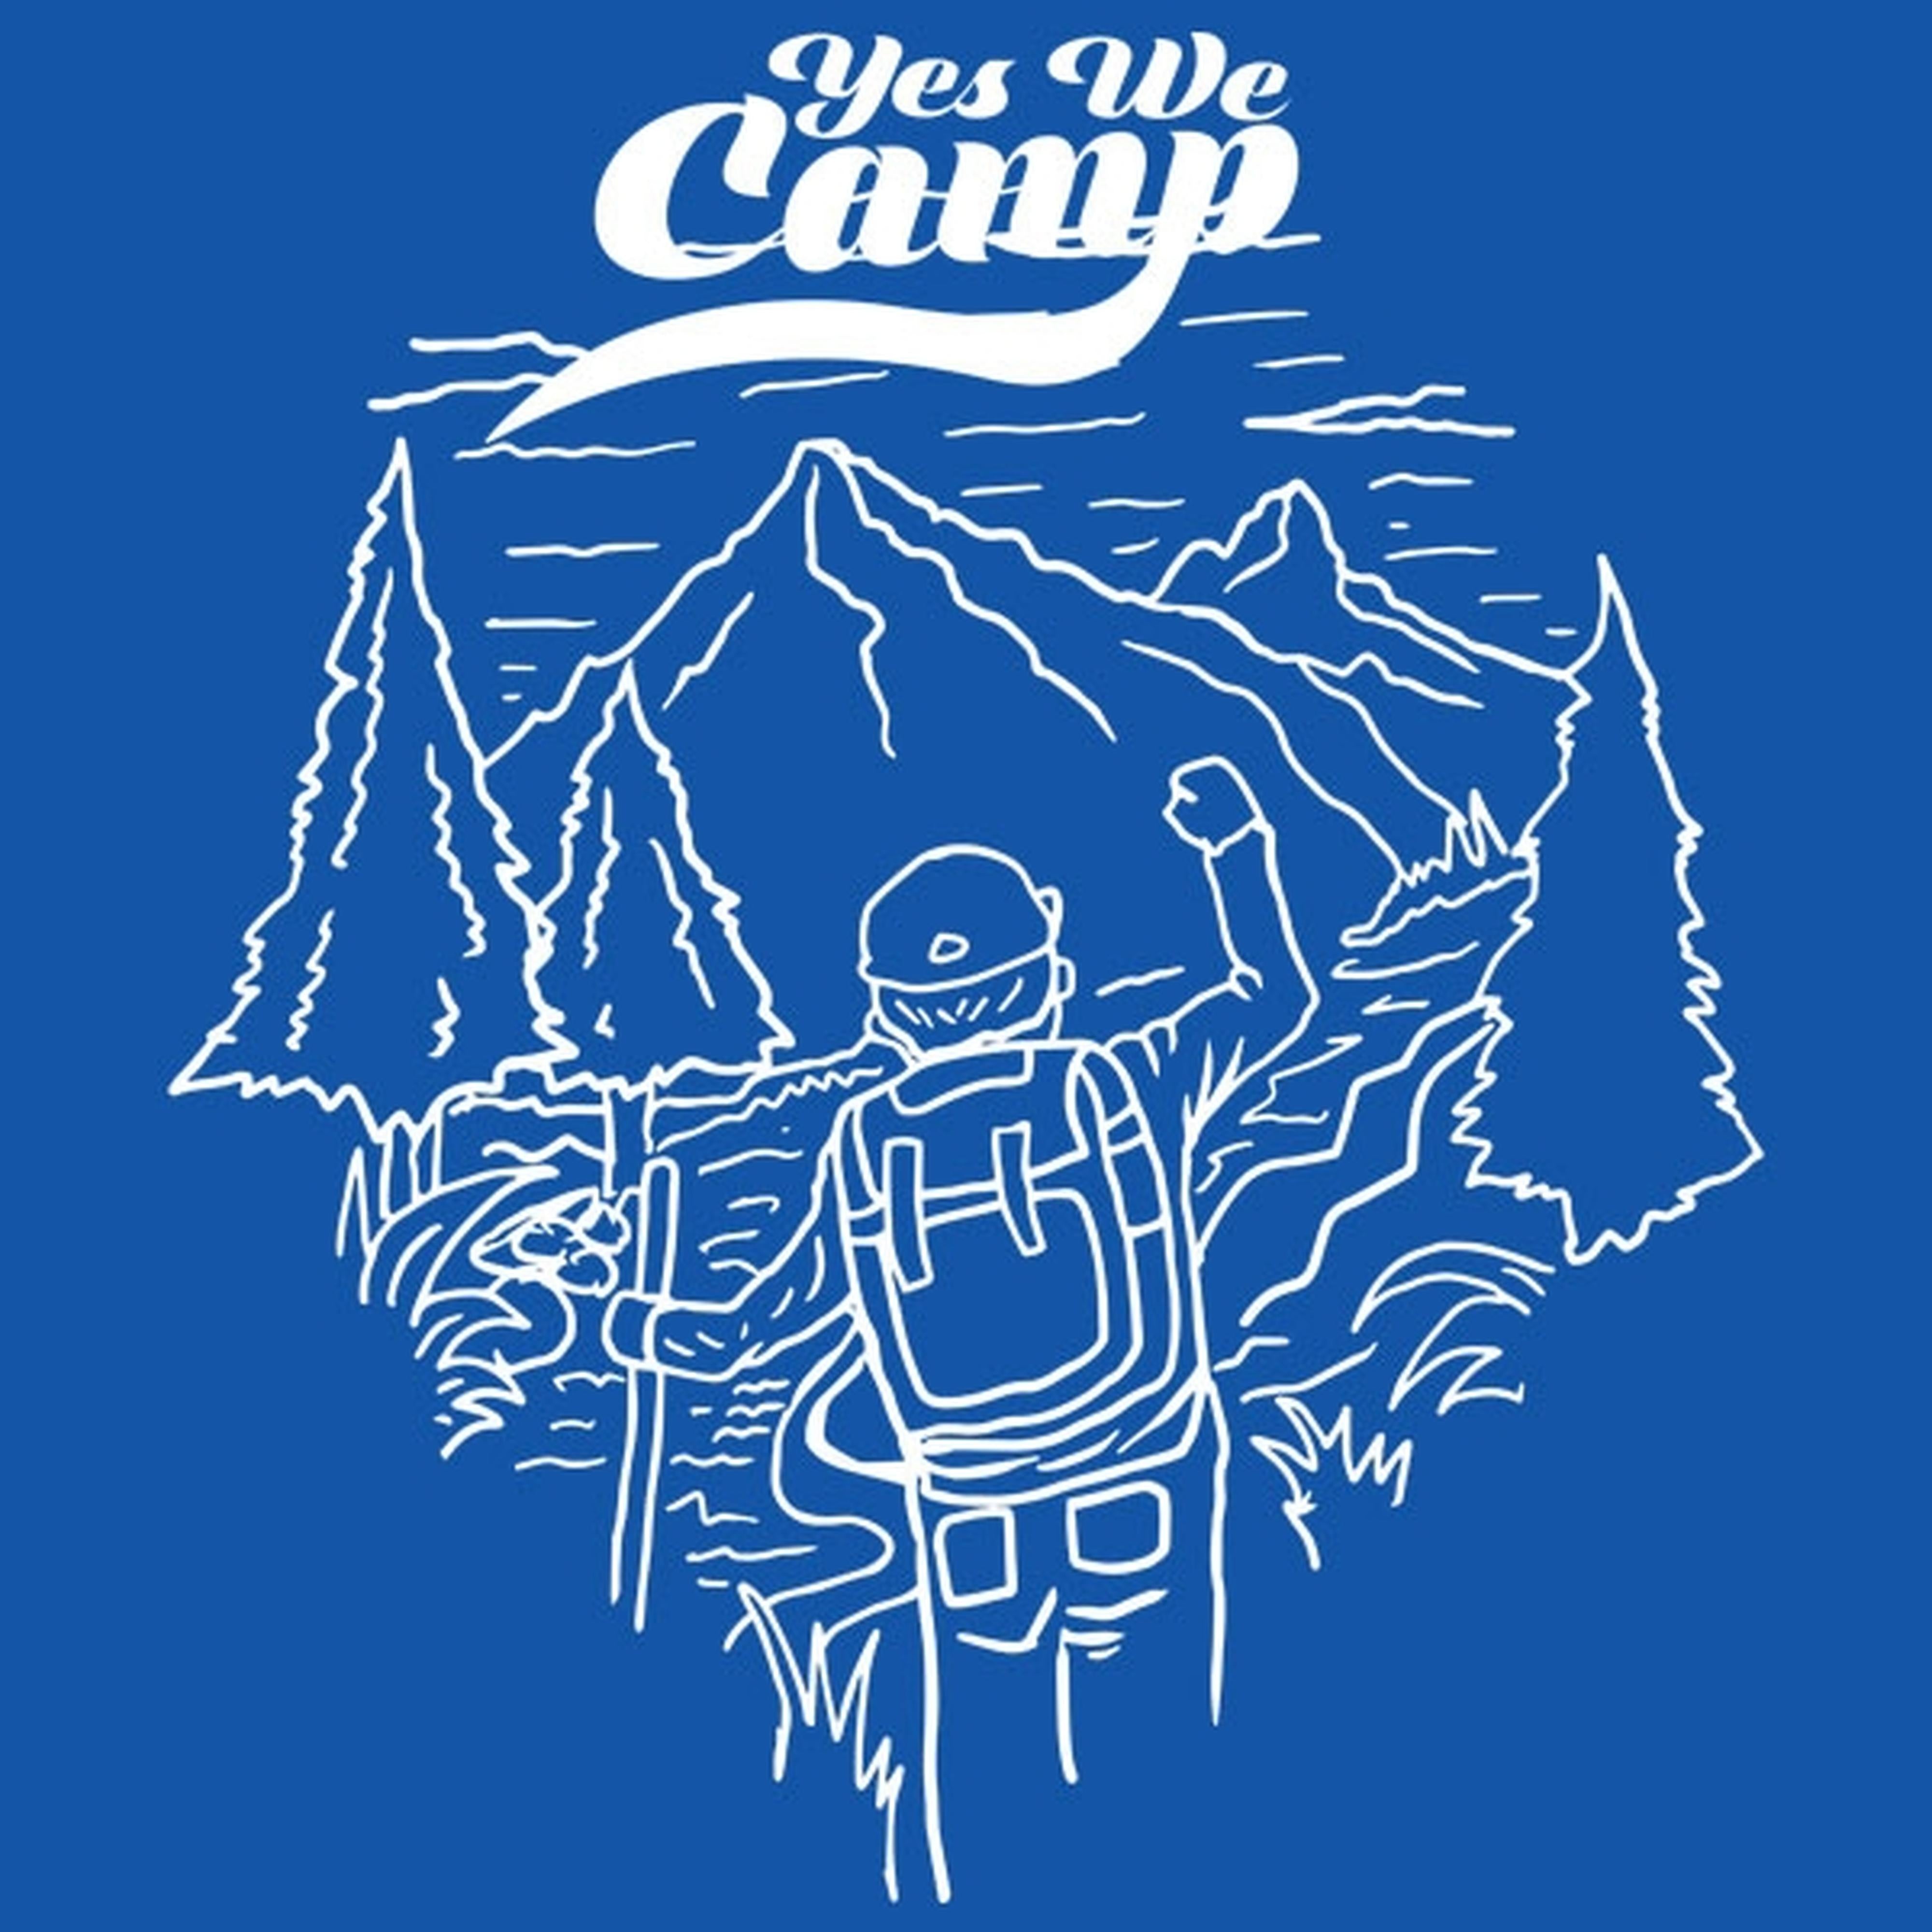 Yes, we camp! - T-shirt